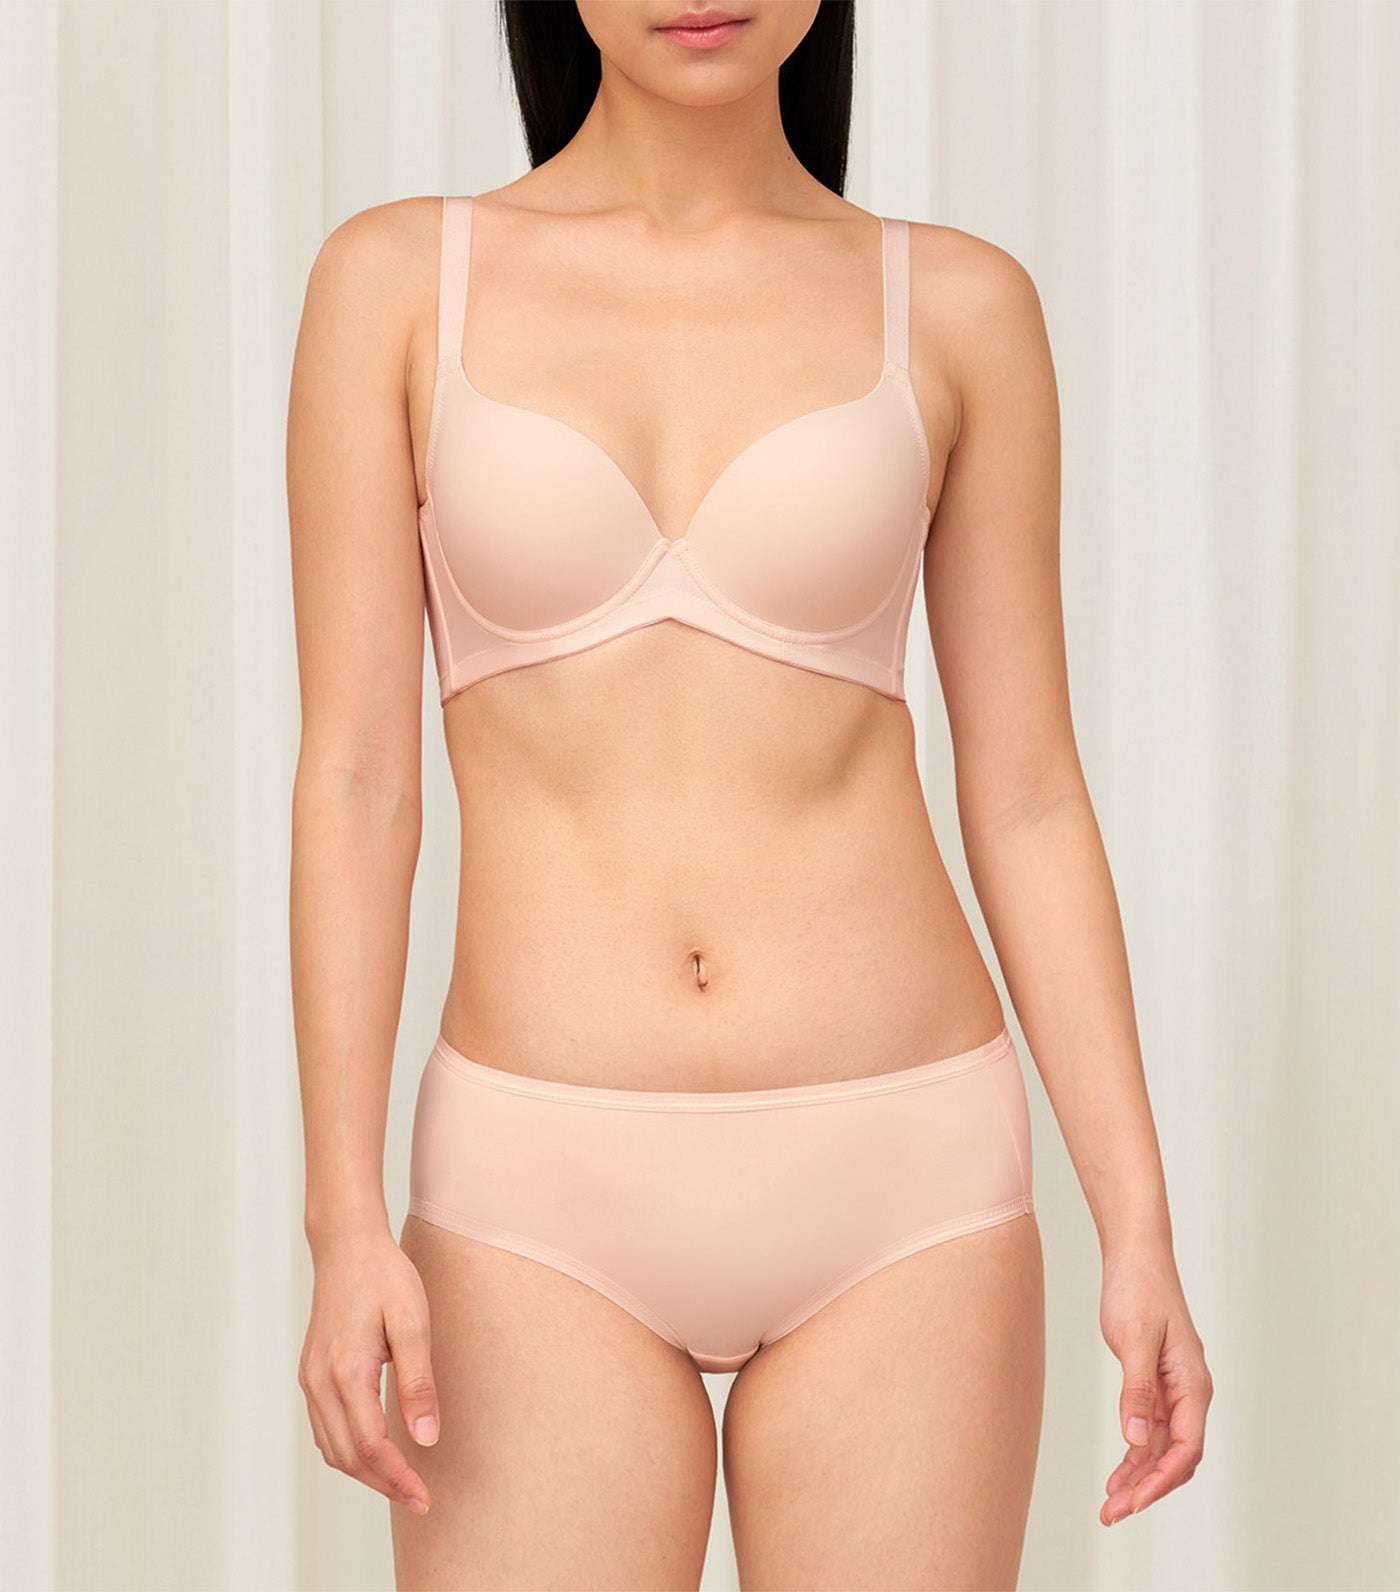 BLS - Pero Wired And Padded Cotton Bra - Pink – Makeup City Pakistan